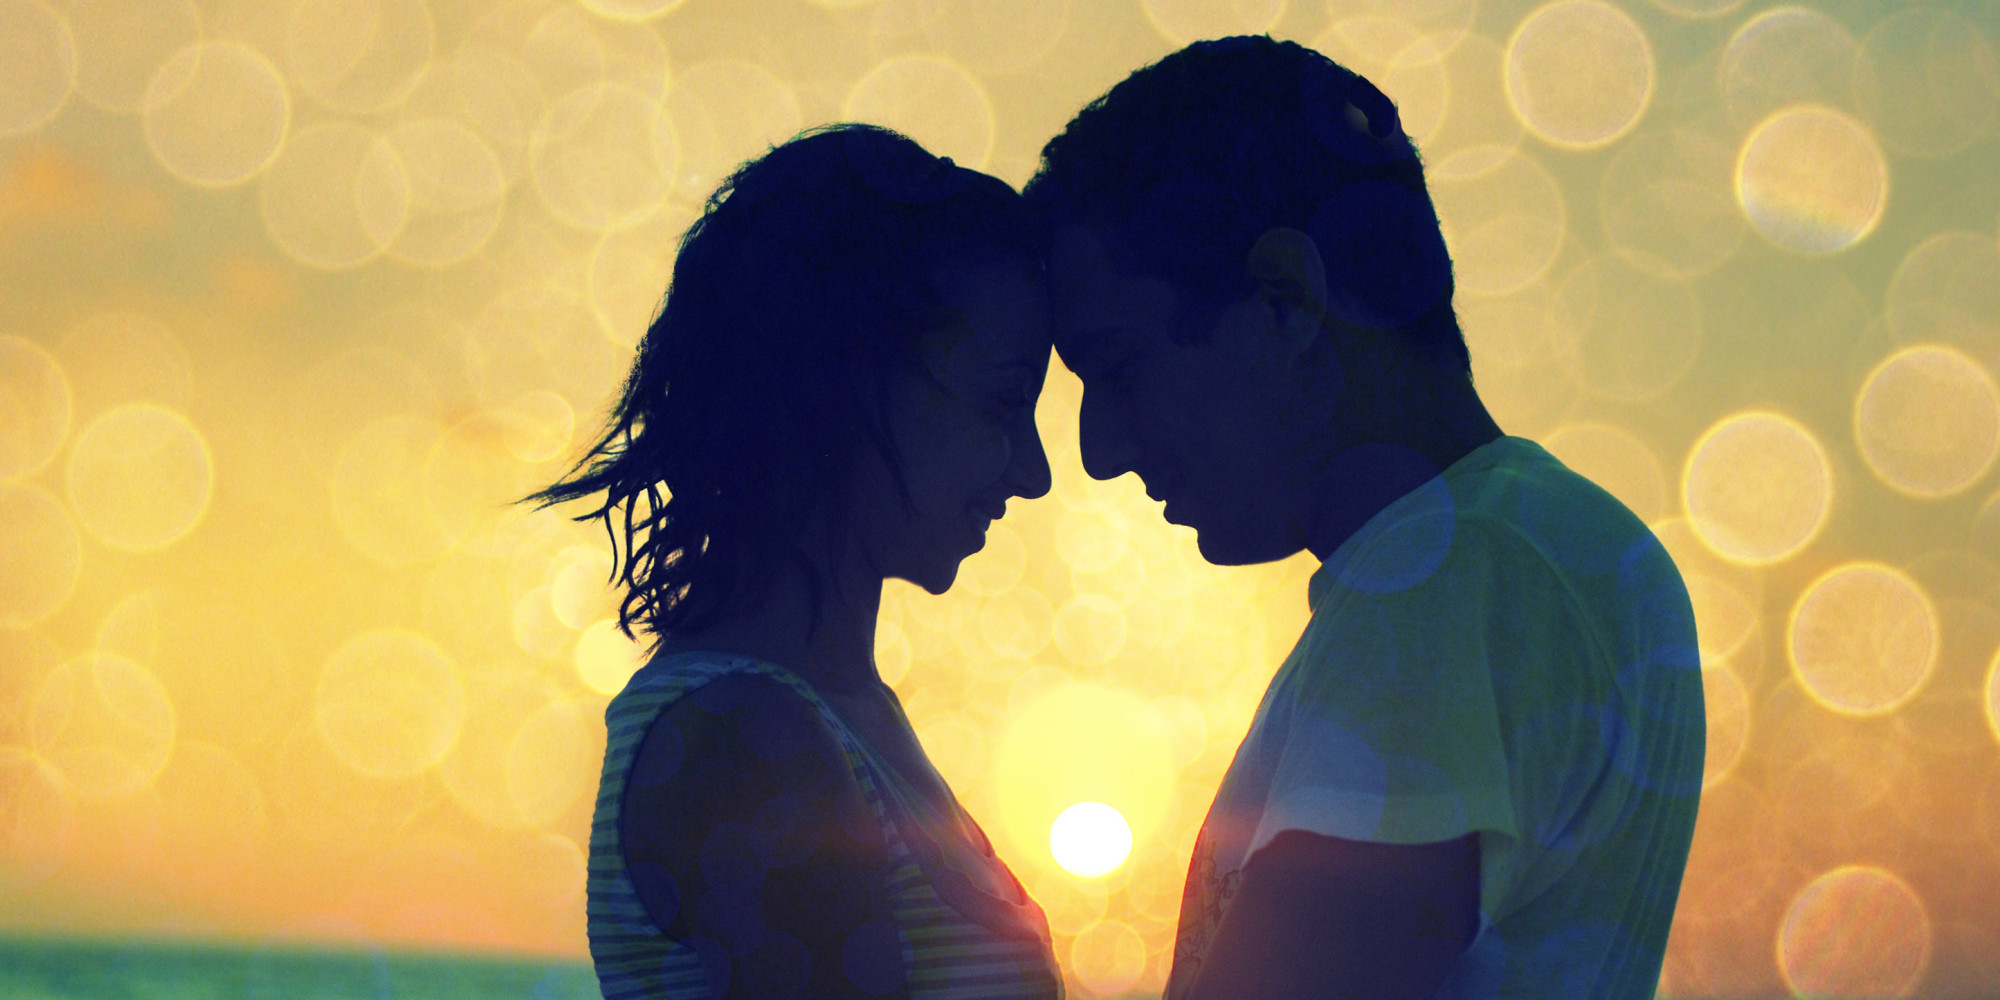 How to Attract Romantic Relationships | HuffPost